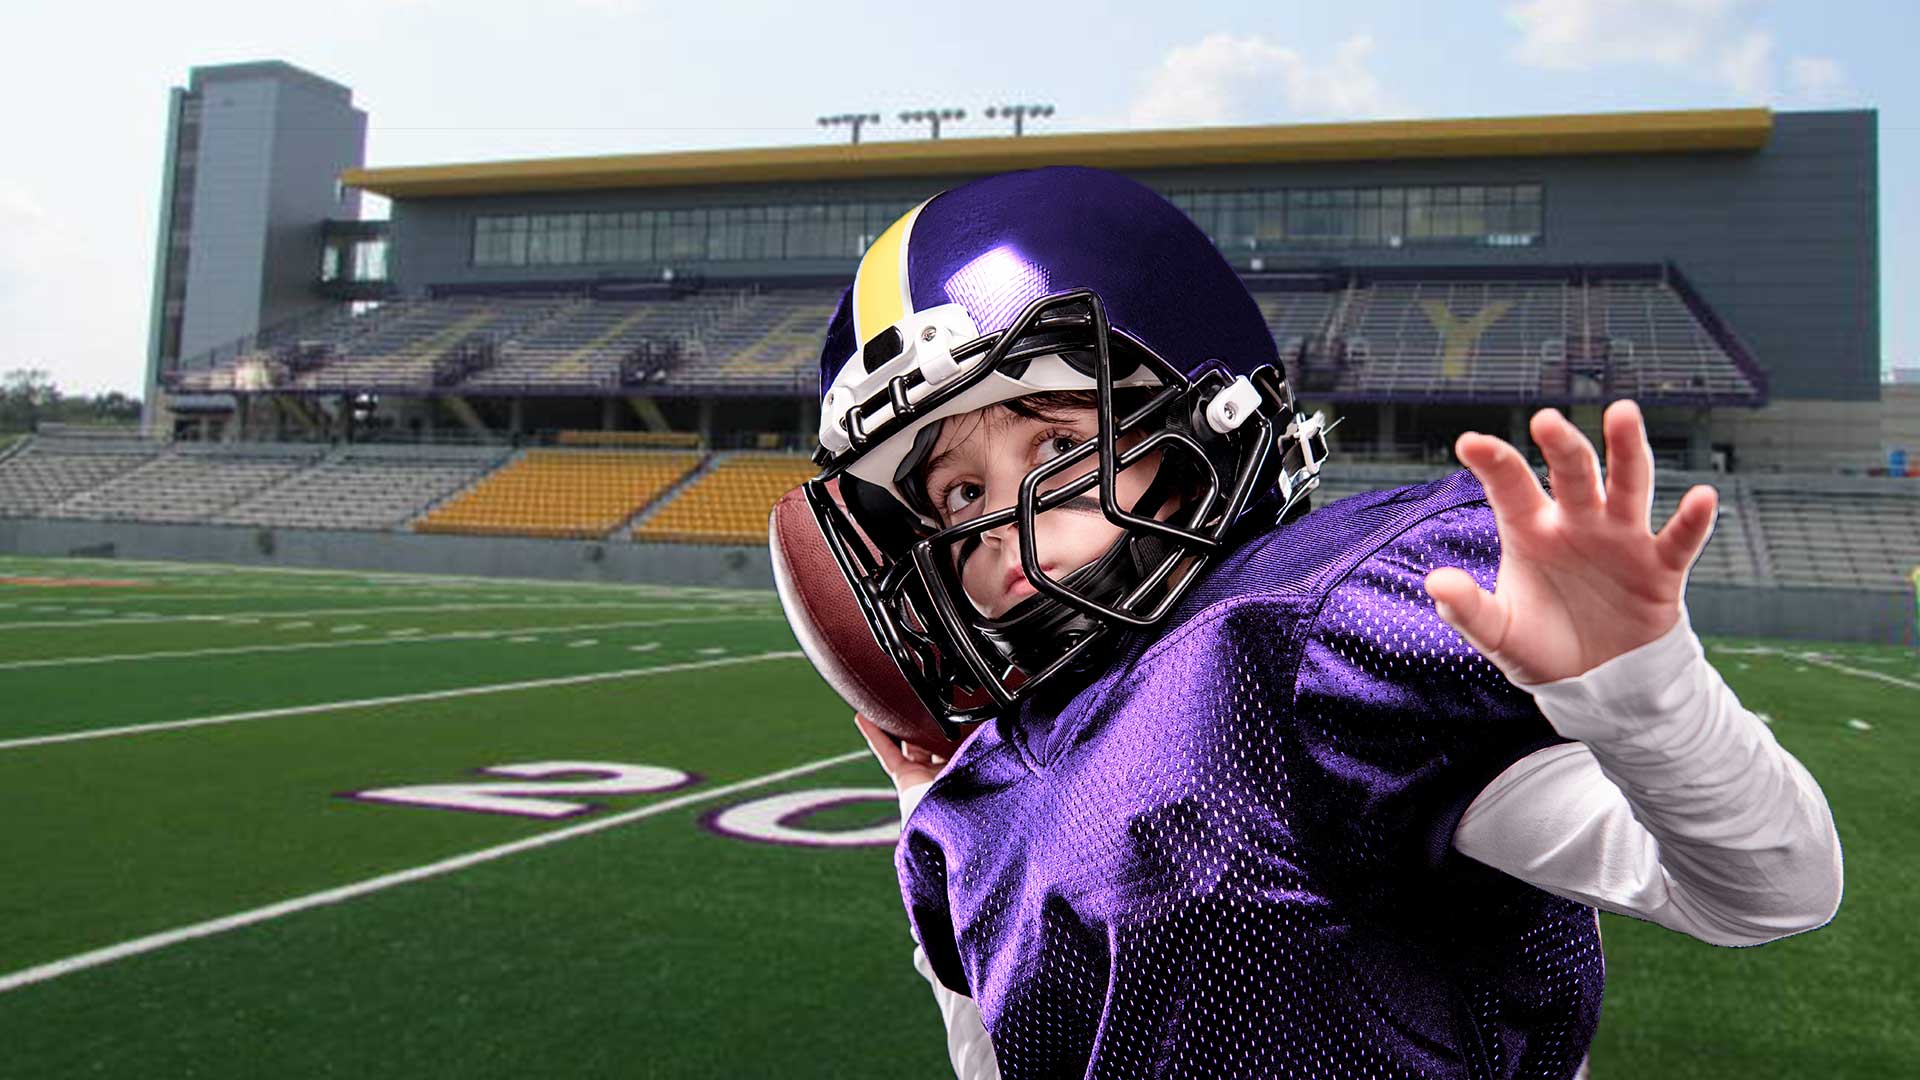 Vikings-Aim-to-Revive-Viewer-Interest-By-Introducing-Adorable-New-6-Year-Old-Teammate.jpg